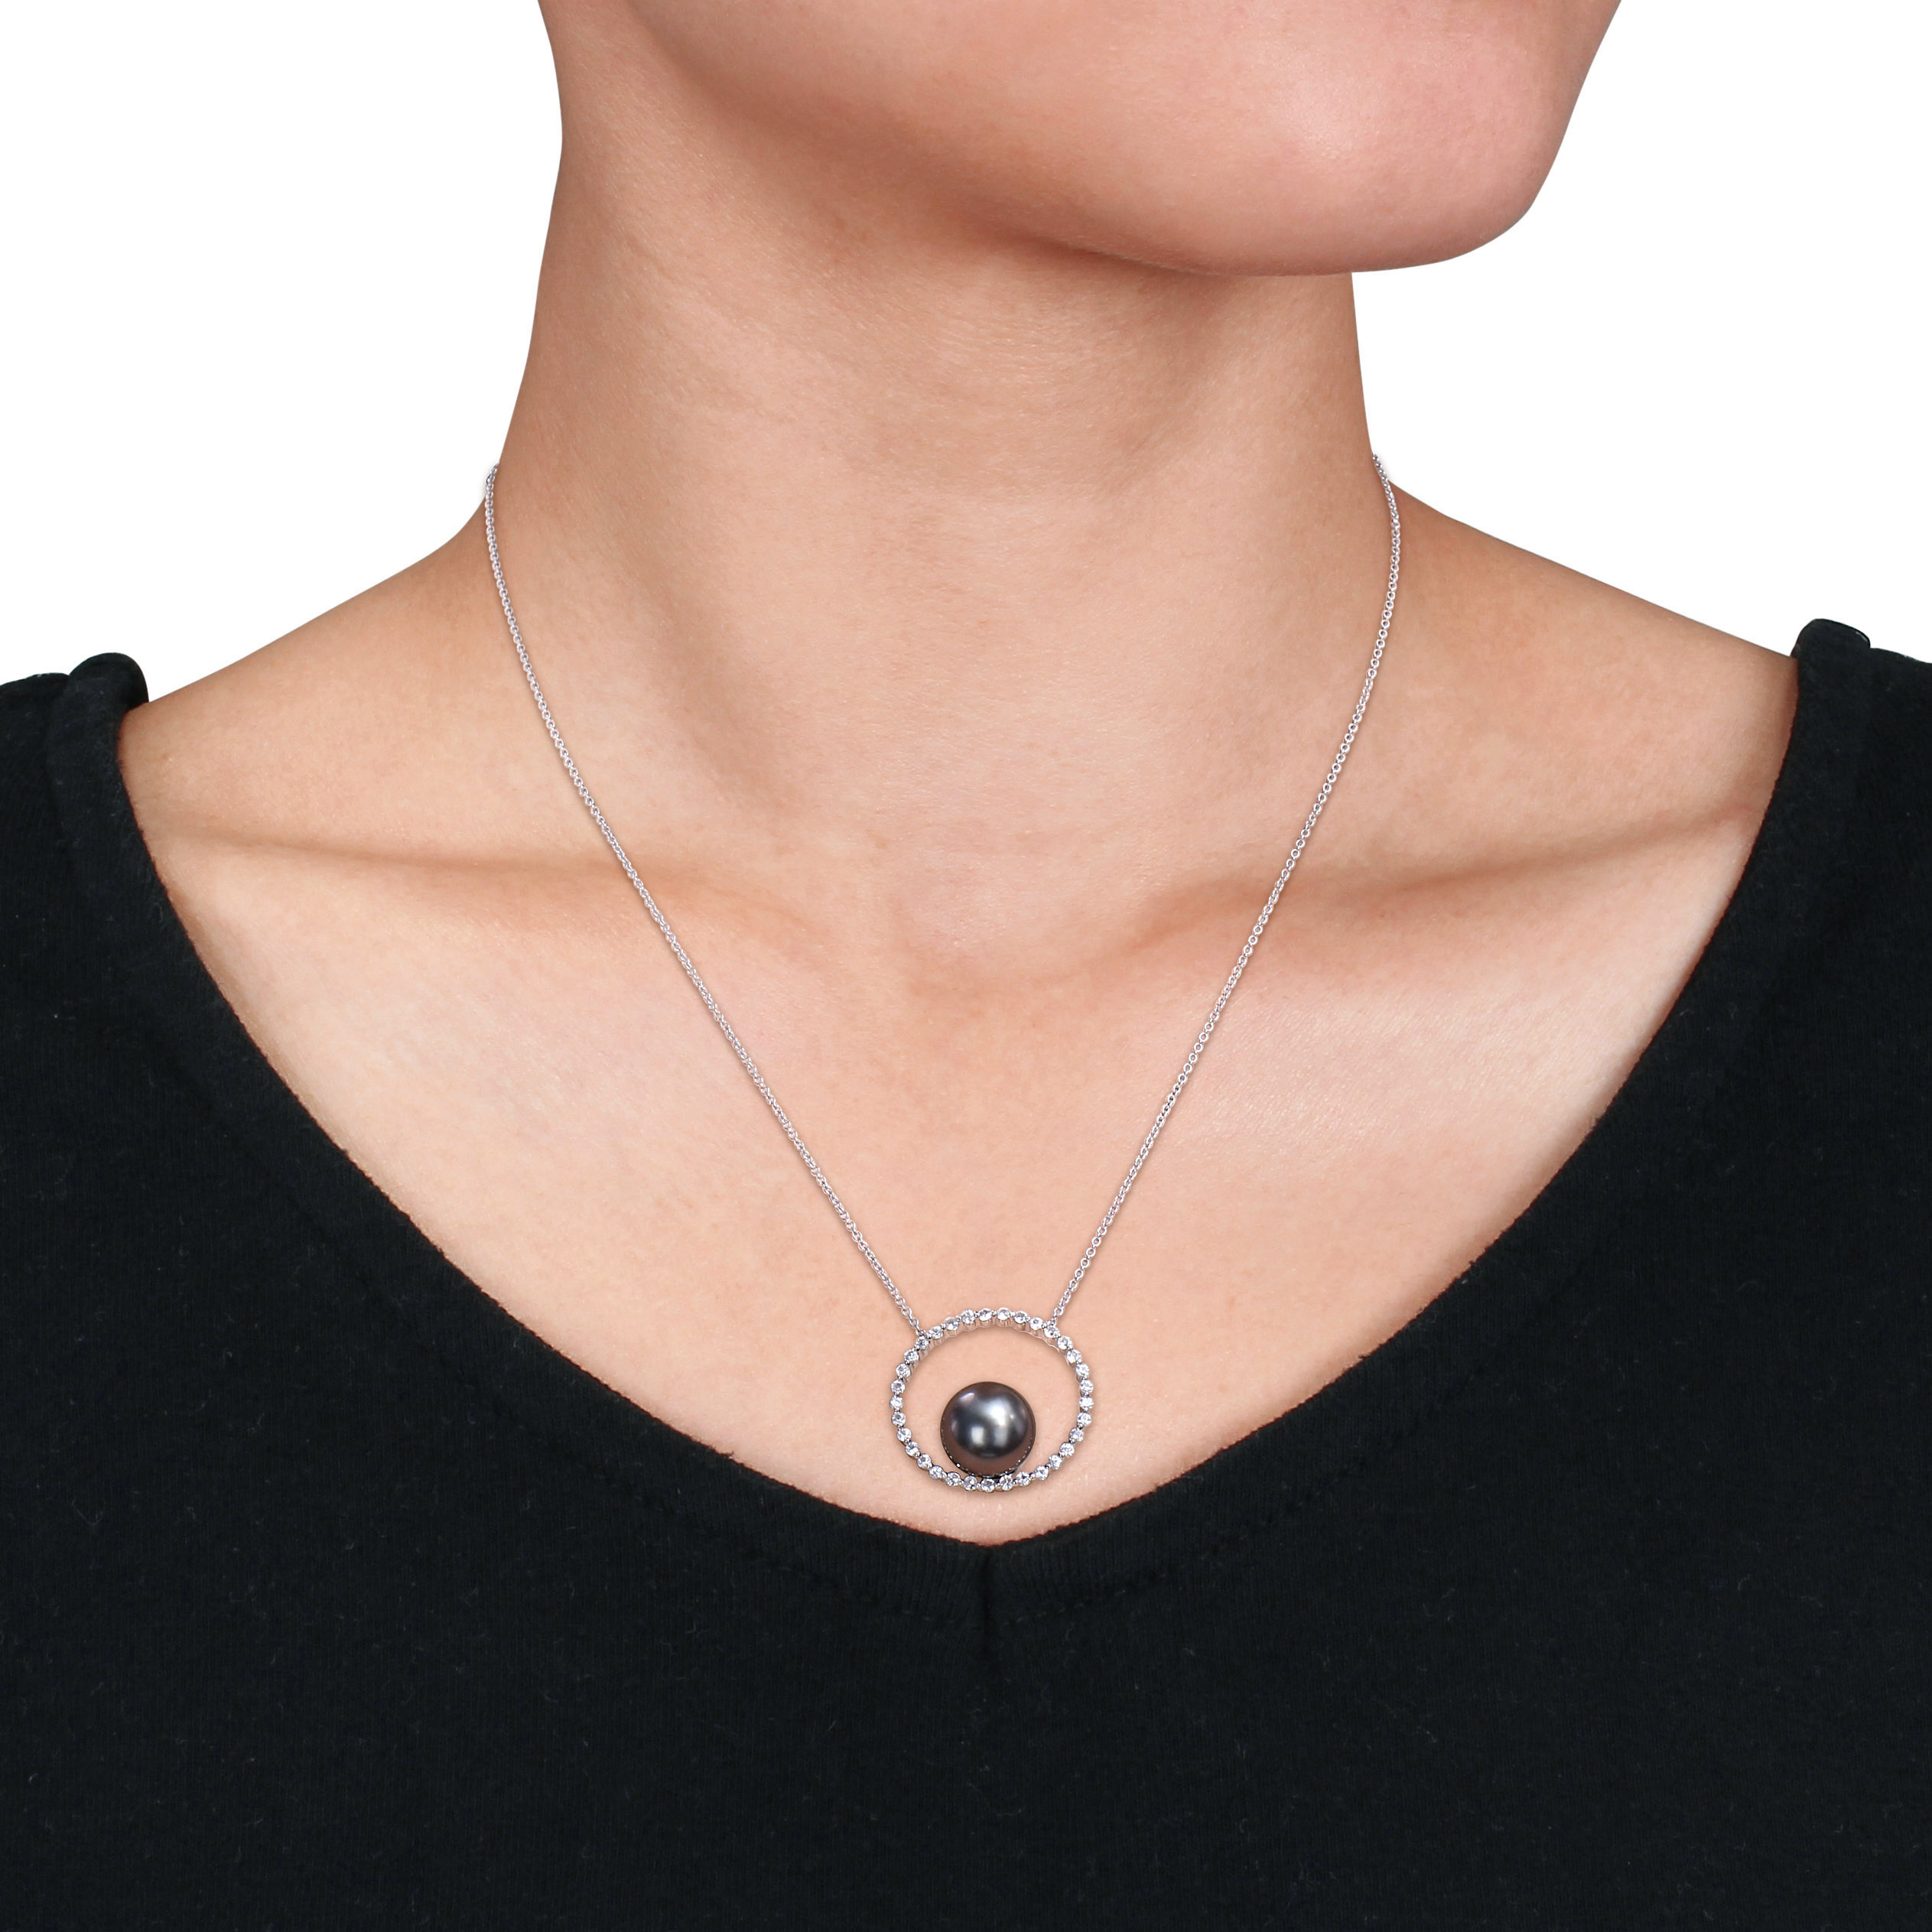 9.5-10 MM Black Tahitian Cultured Pearl and 1/2 CT TGW White Sapphire Circular Pendant with Chain in 10k White Gold